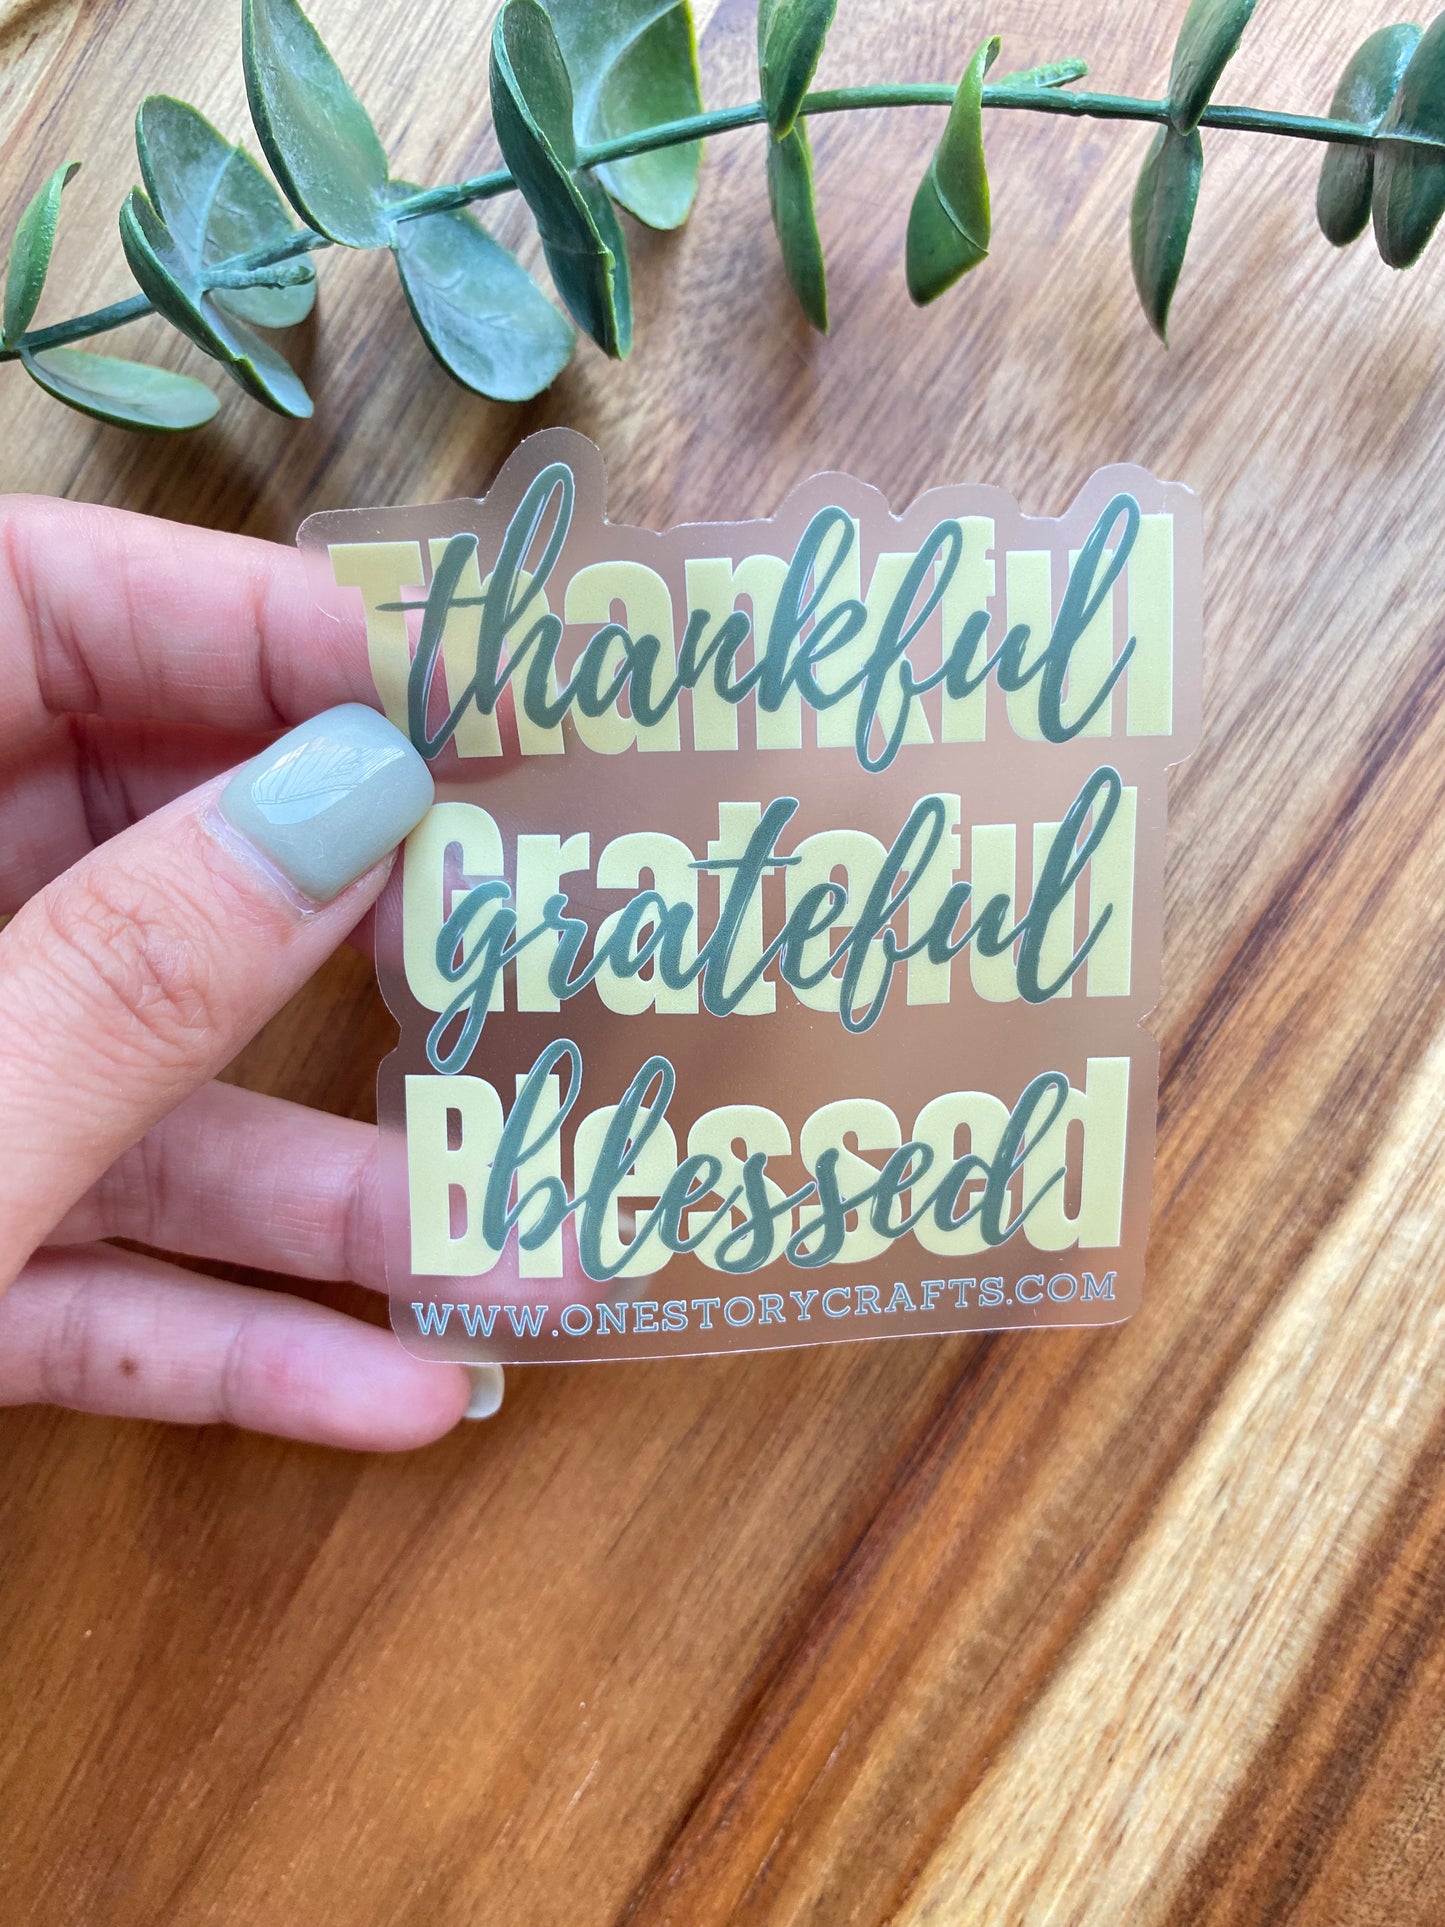 CLEAR Thankful | Gratfeul | Blessed Sticker